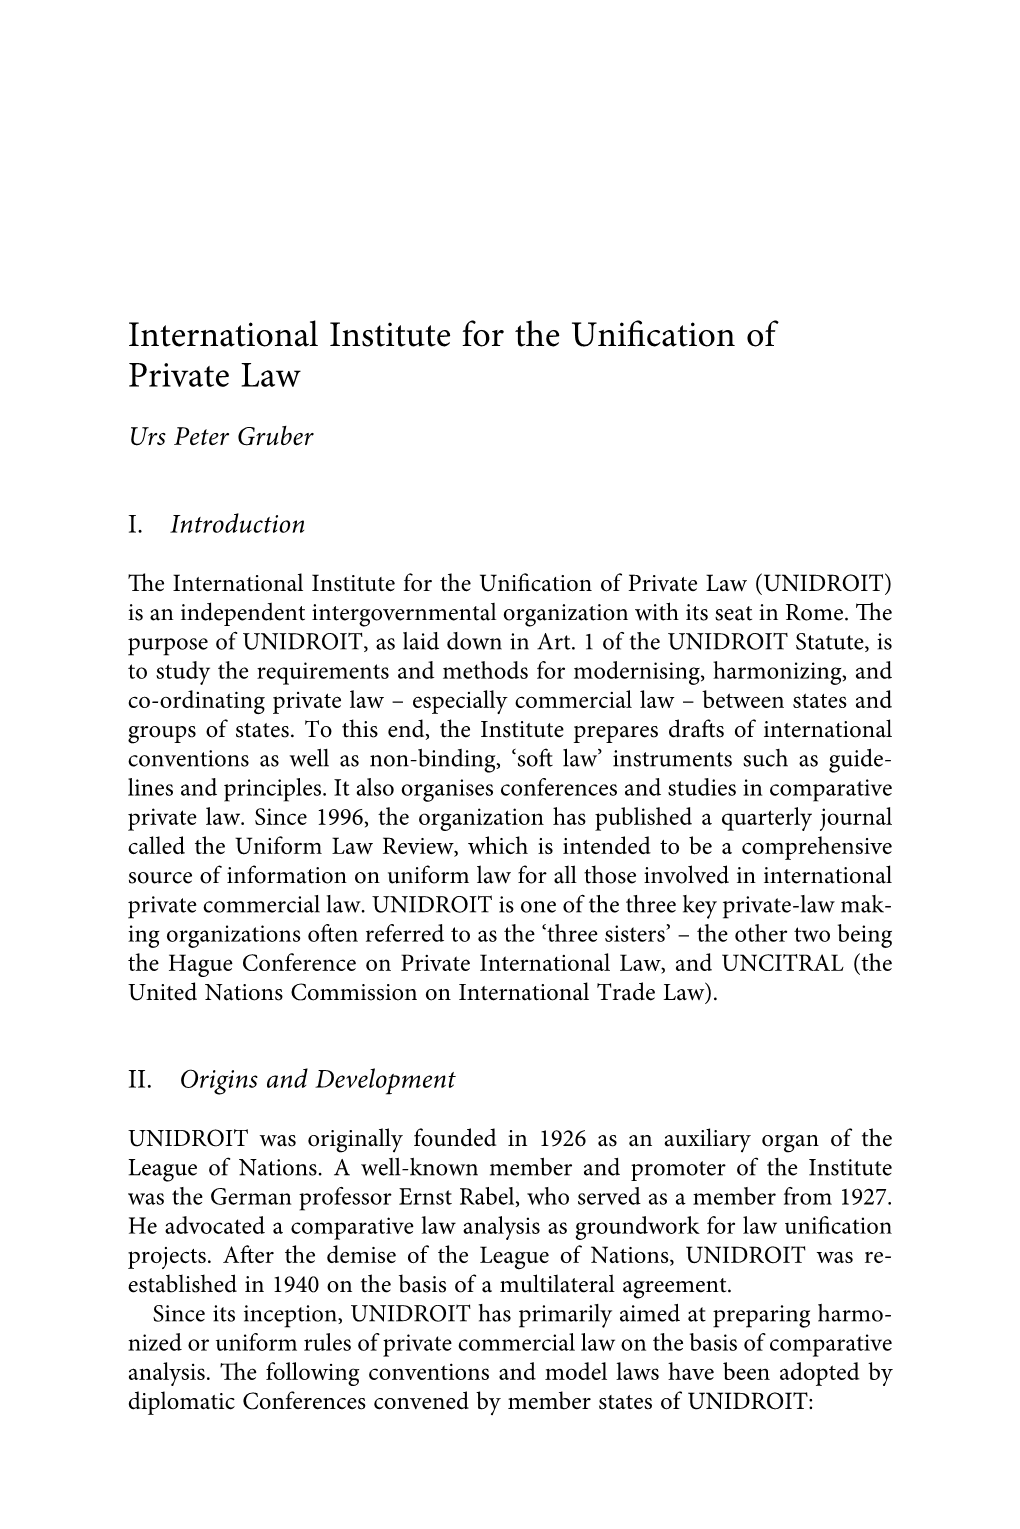 International Institute for the Unification of Private